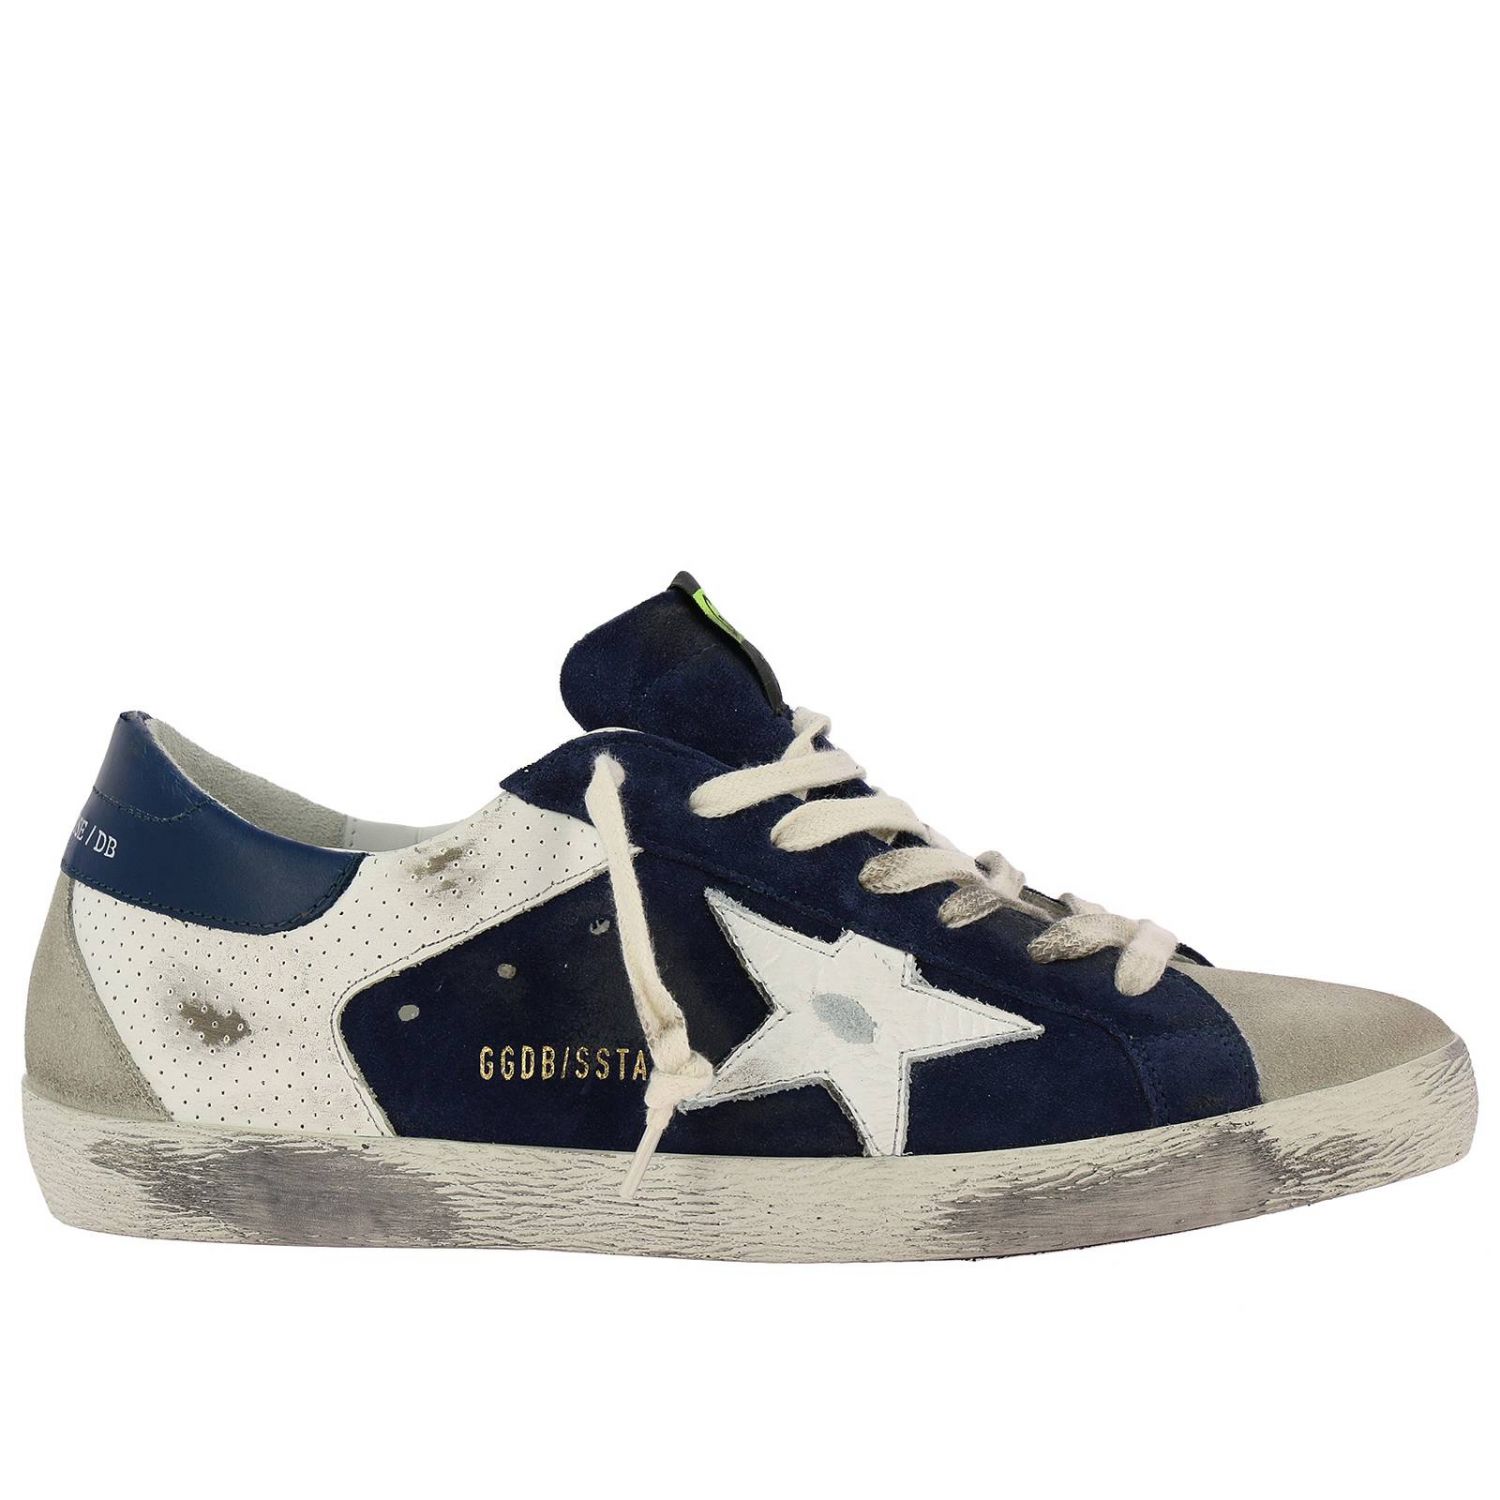 Golden Goose Outlet: sneakers for man - Blue | Golden Goose sneakers ...